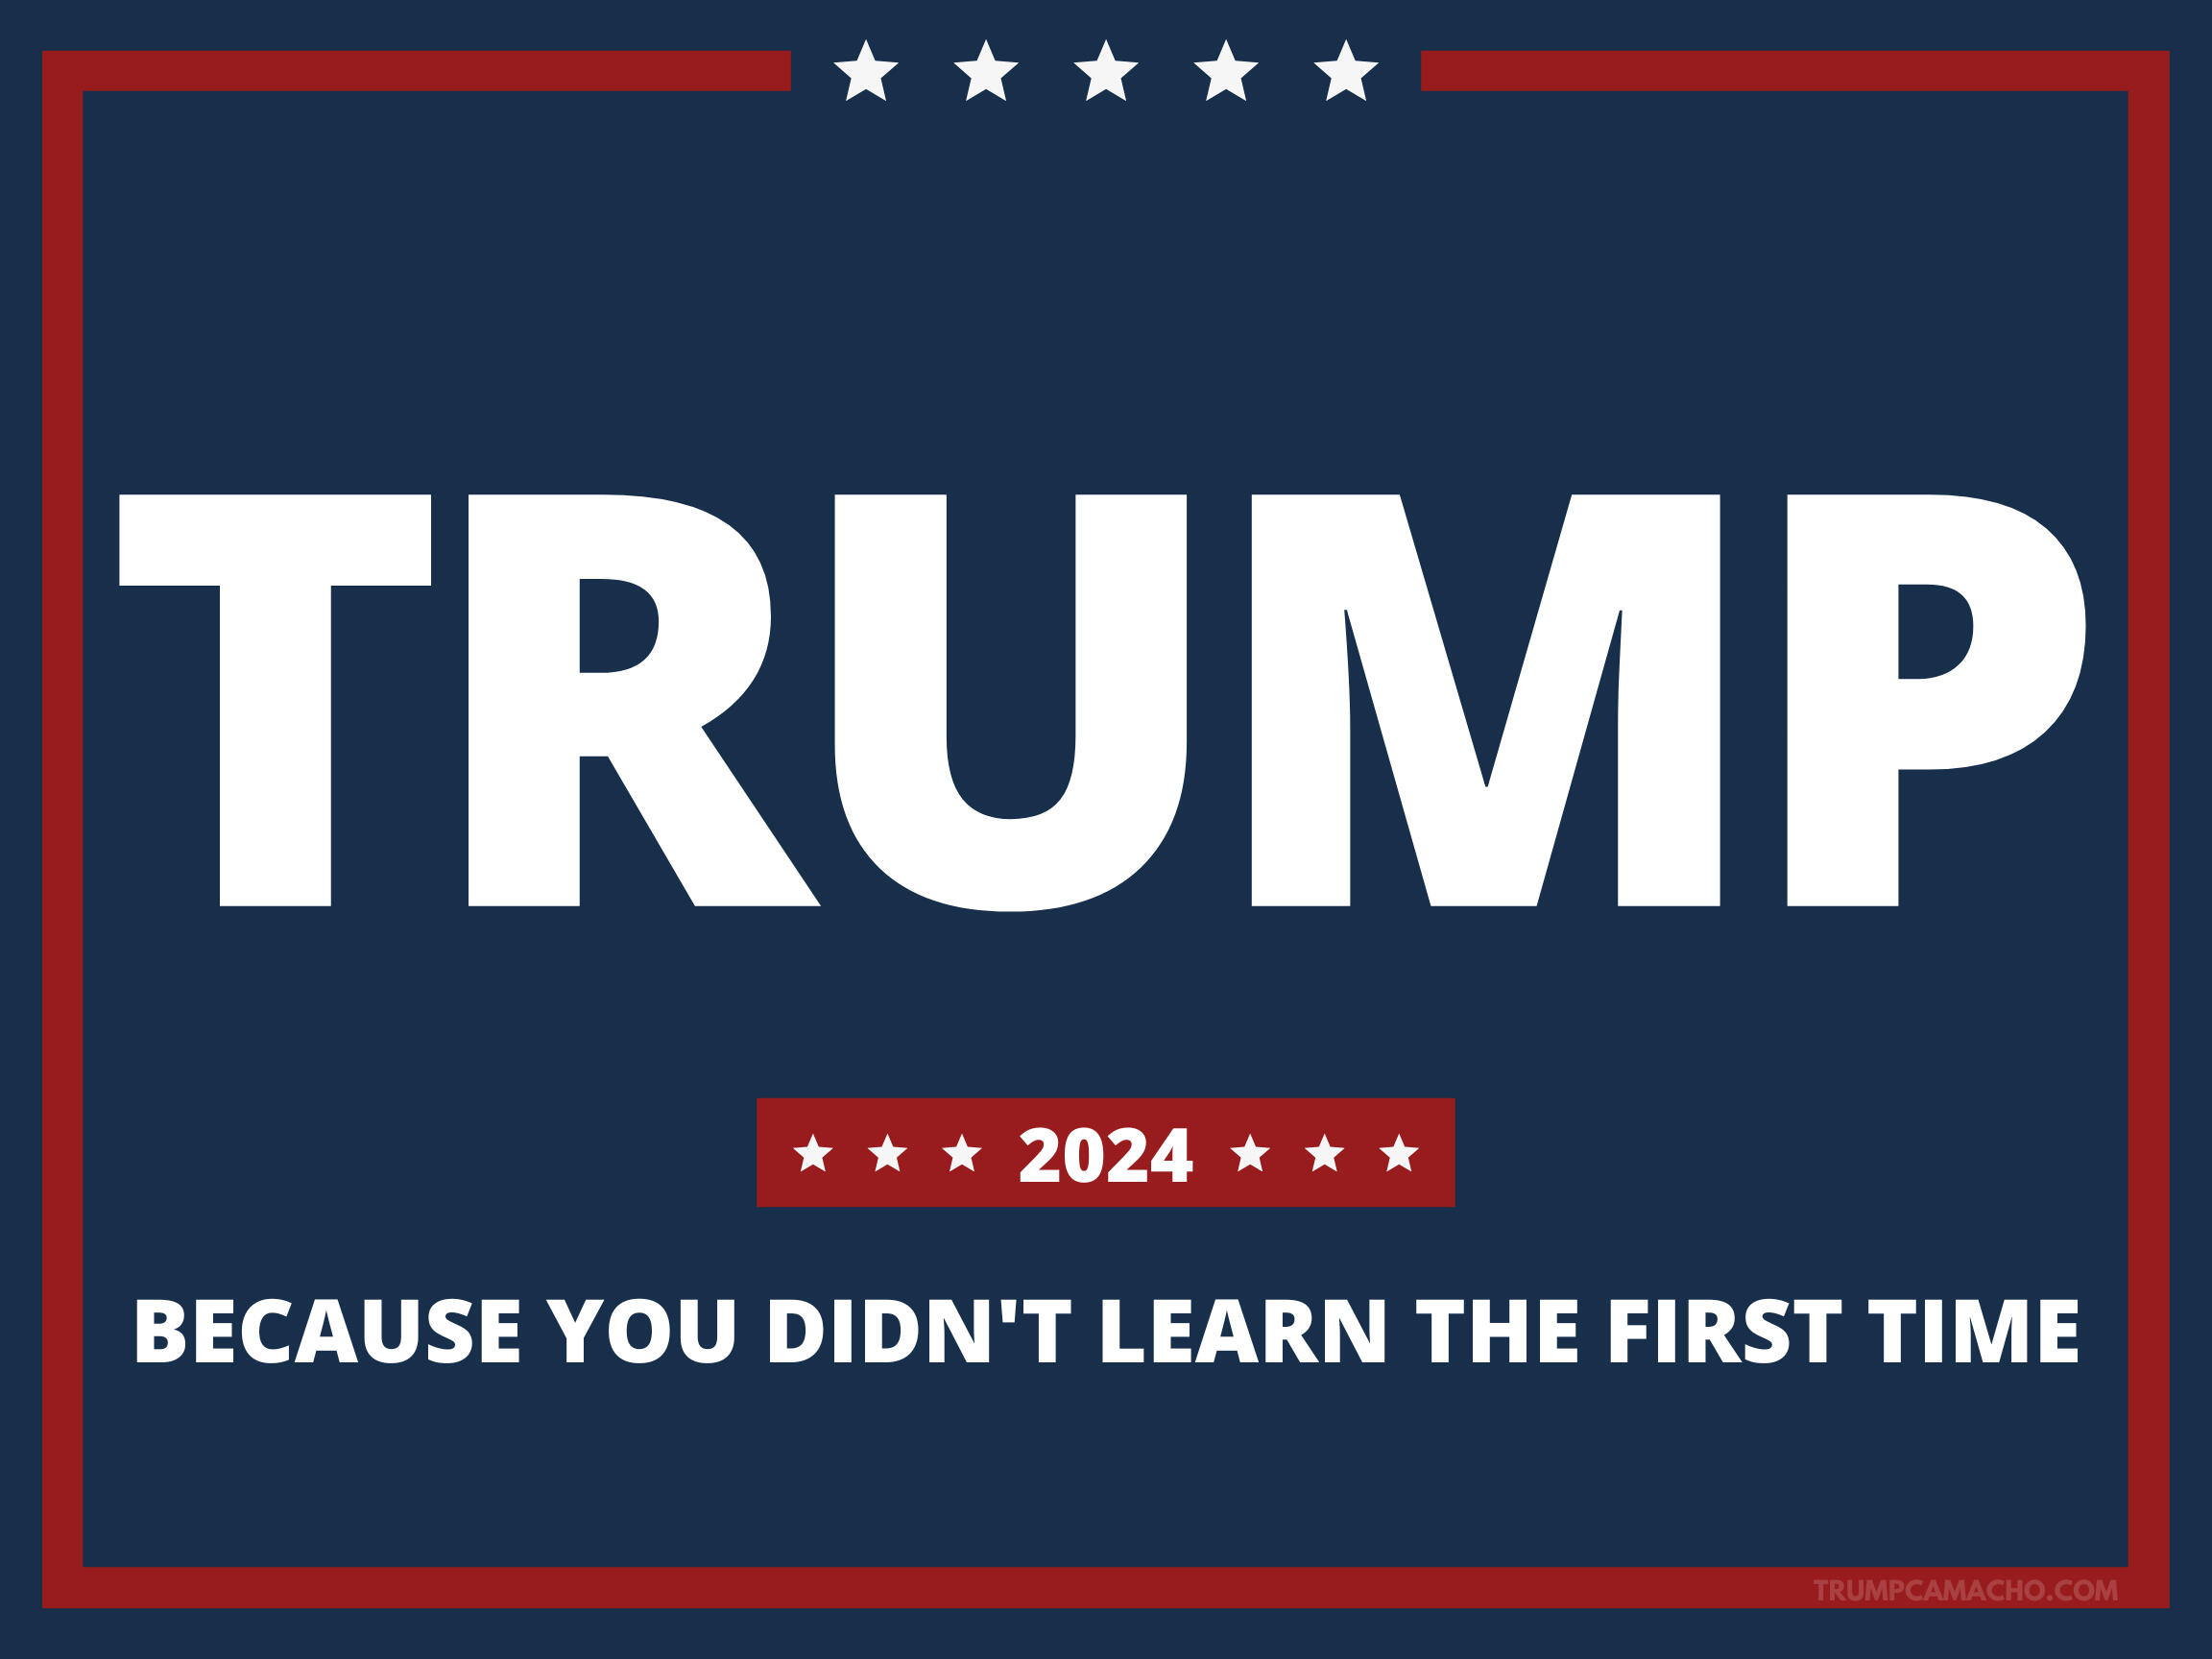 Trump Camacho 2024 Campaign Poster: Because You Didn't Learn The First Time Poster